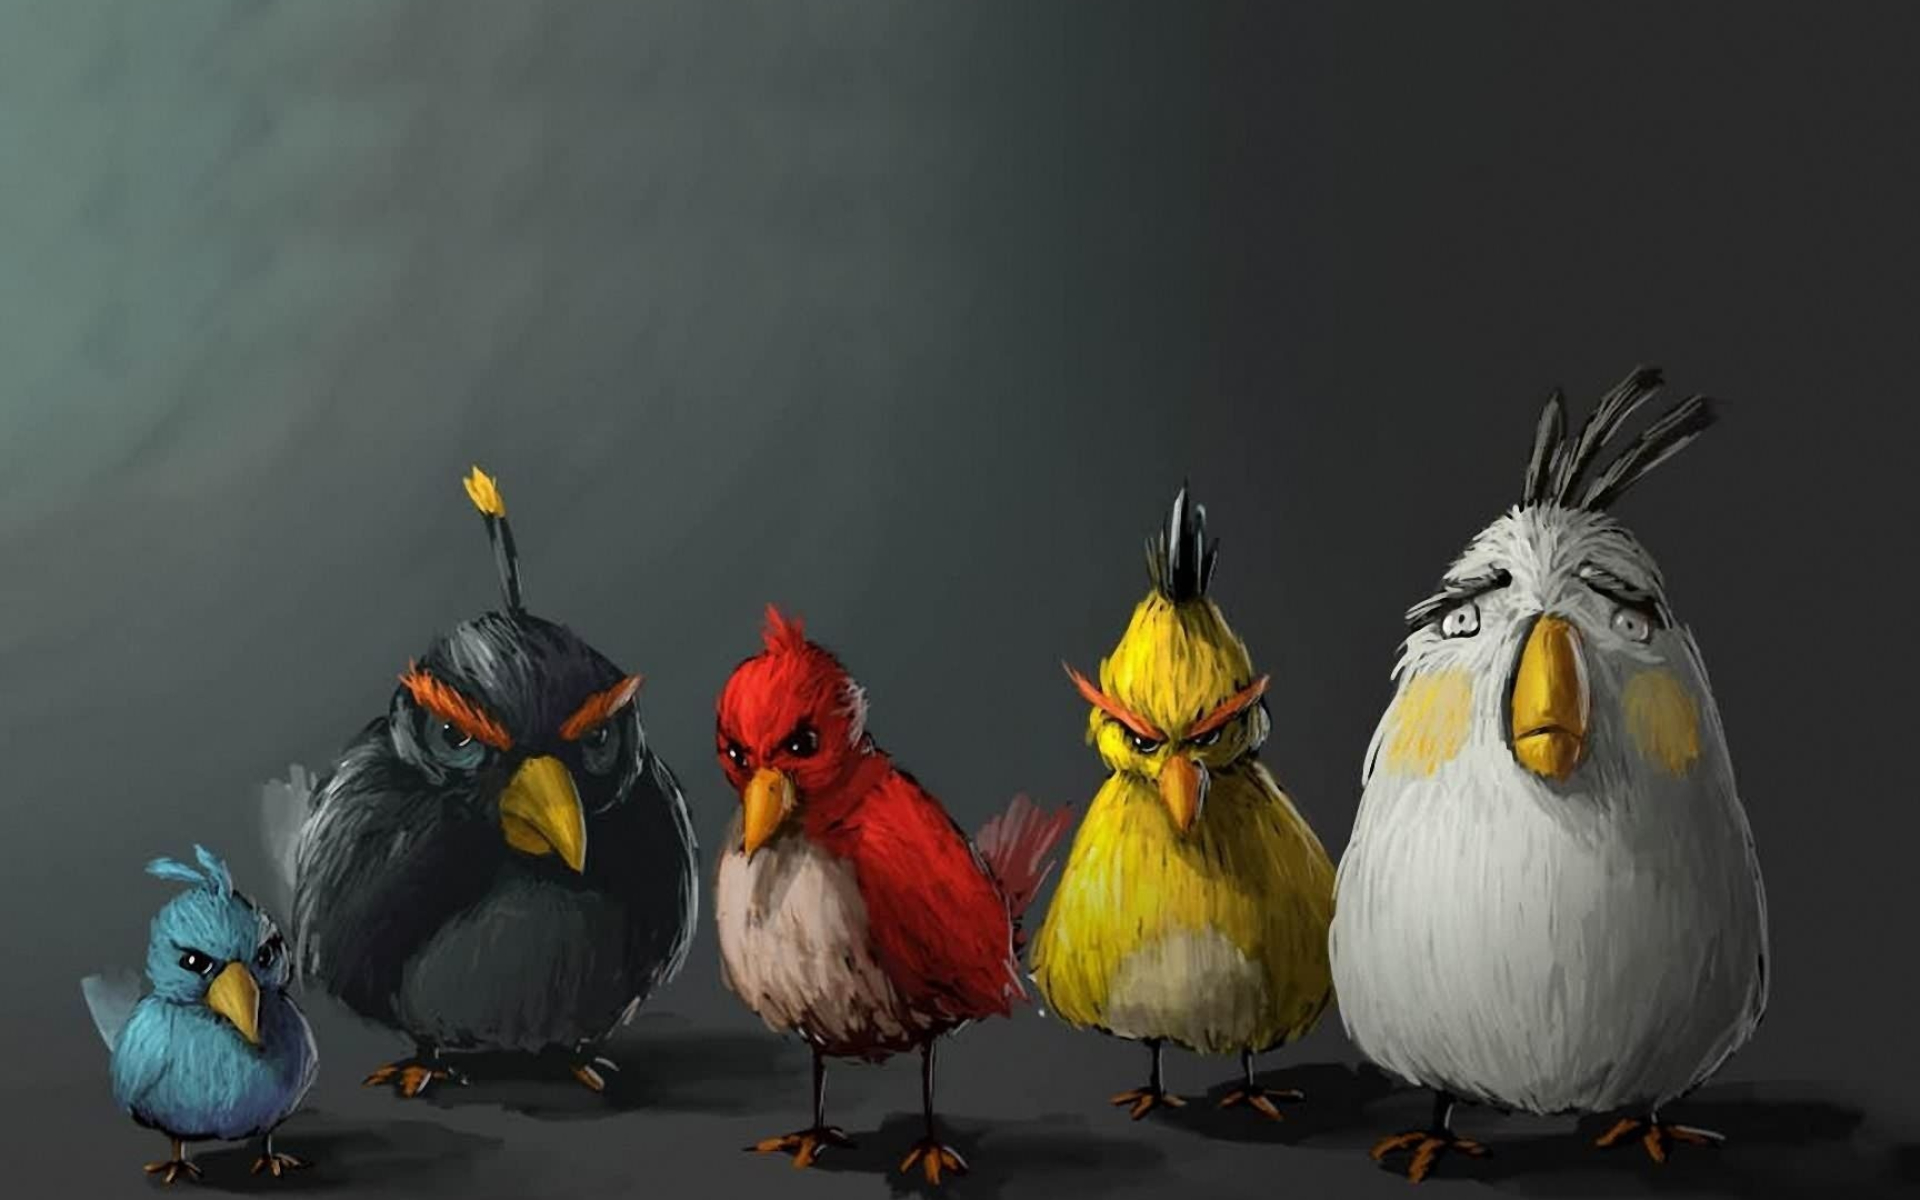 Angry Birds, Game wallpapers, Feathered frenzy, Avian adventure, 1920x1200 HD Desktop